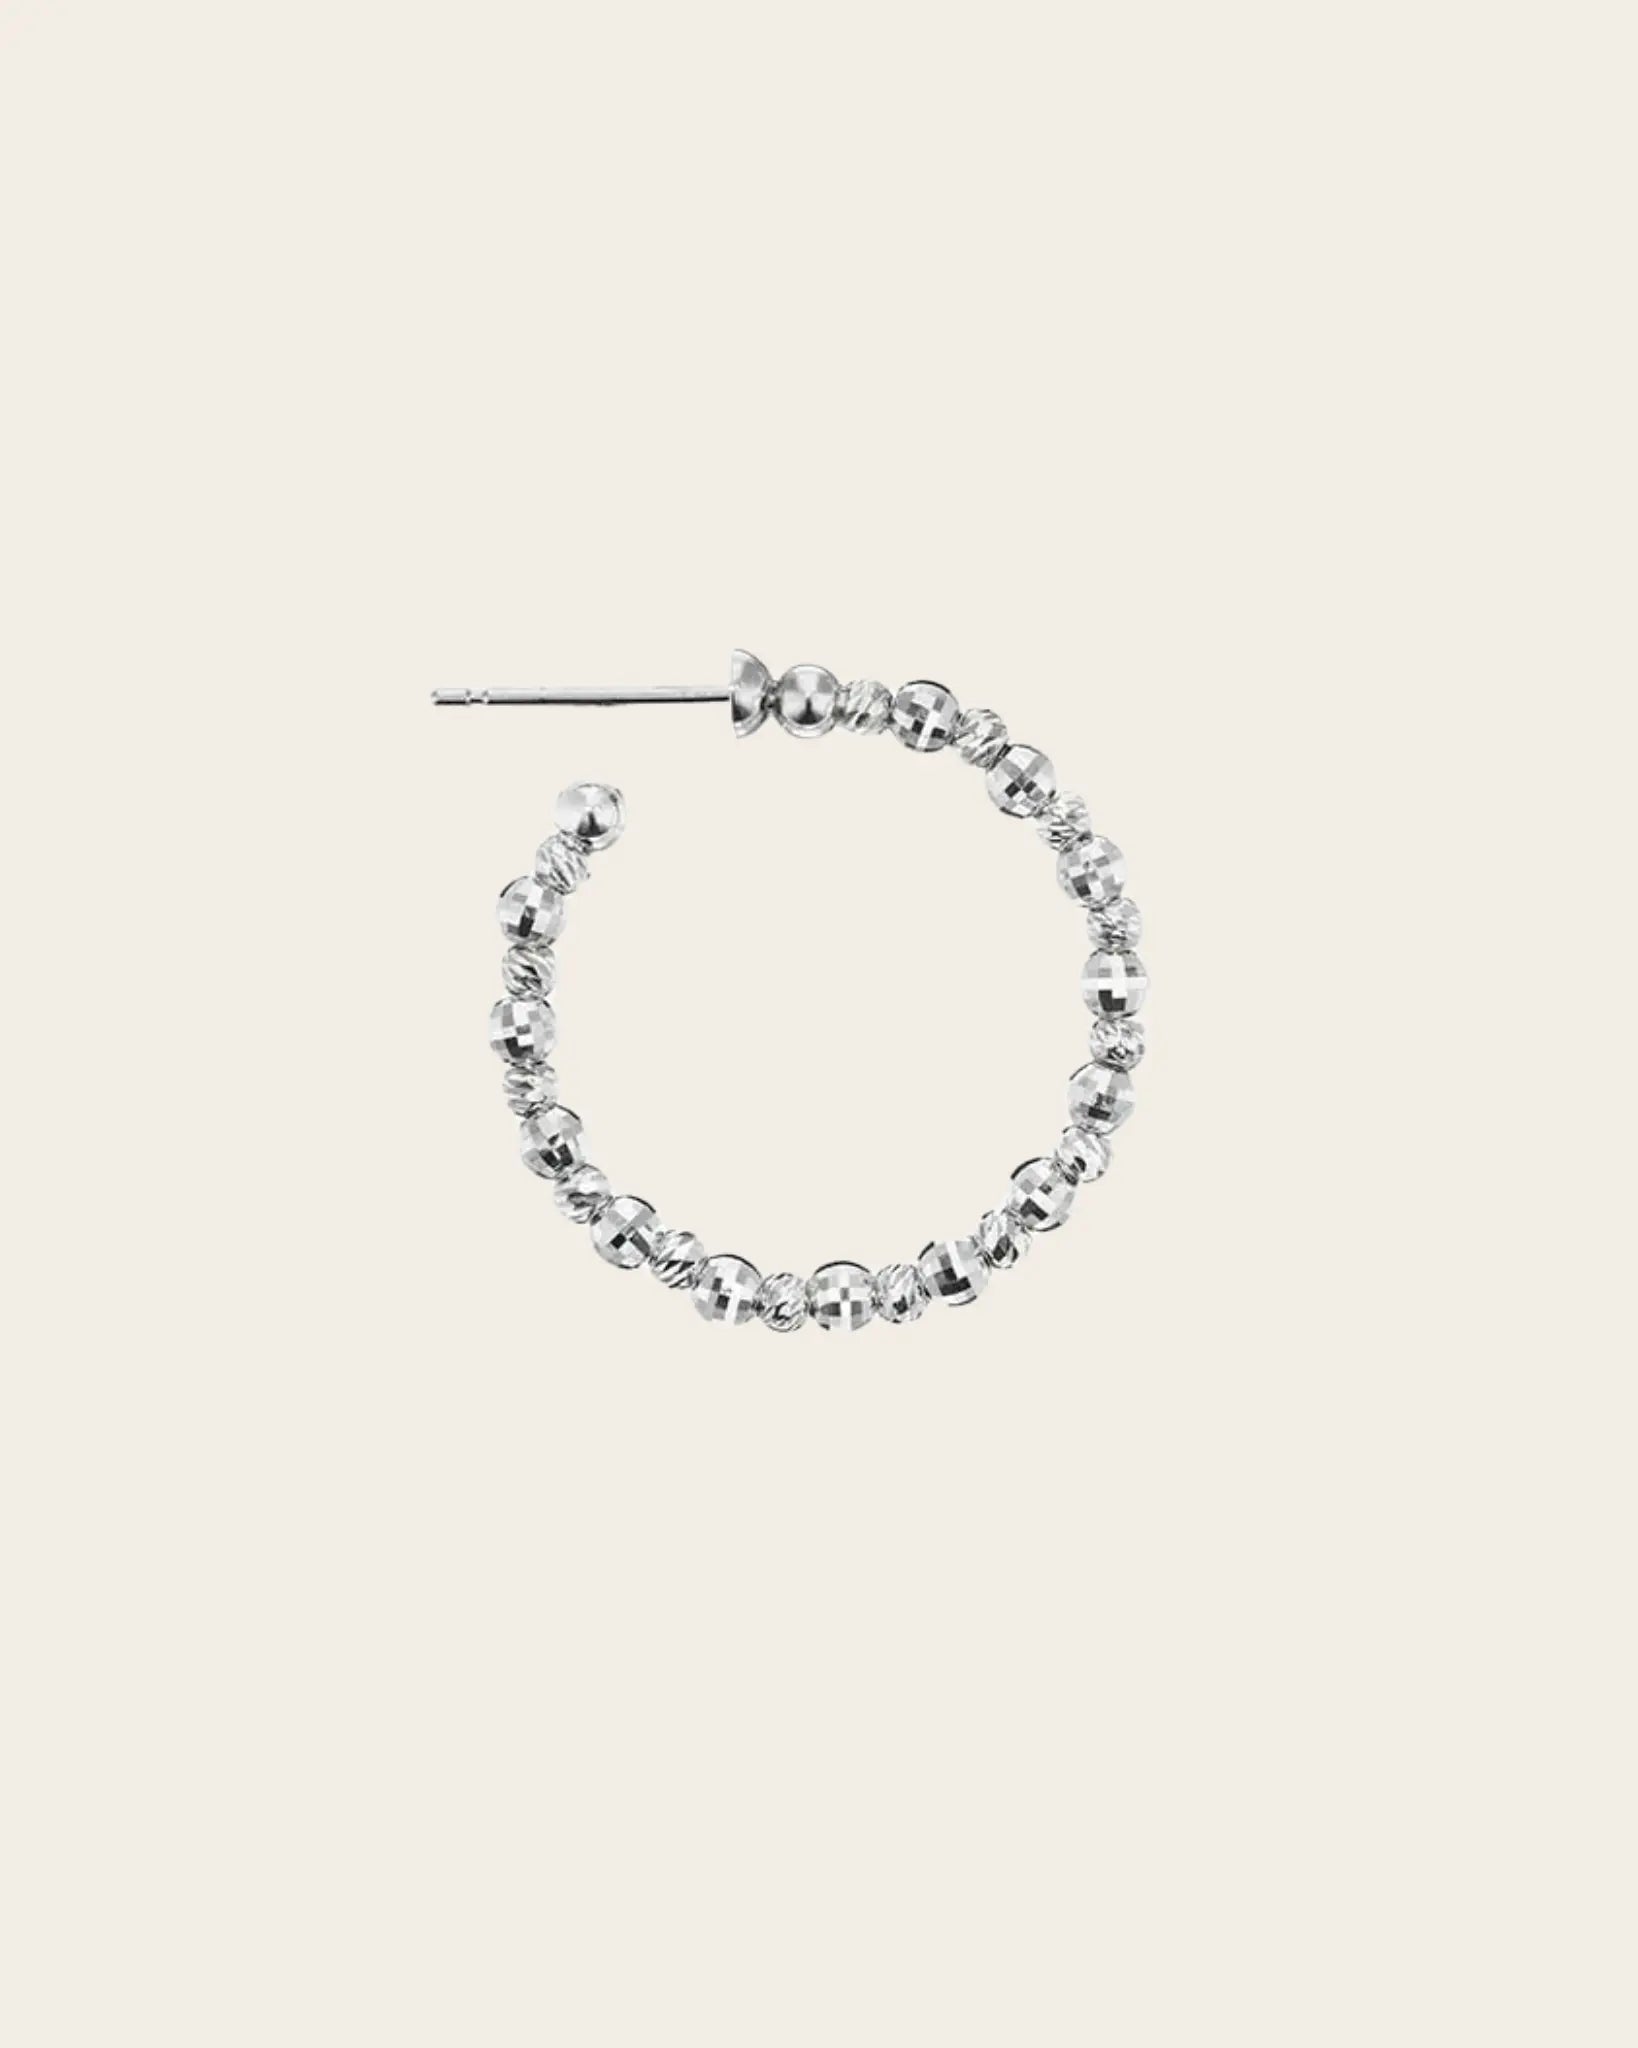 Limitless Small Hoop Earrings Limitless Small Hoop Earrings Platinum Born Platinum Born  Squash Blossom Vail